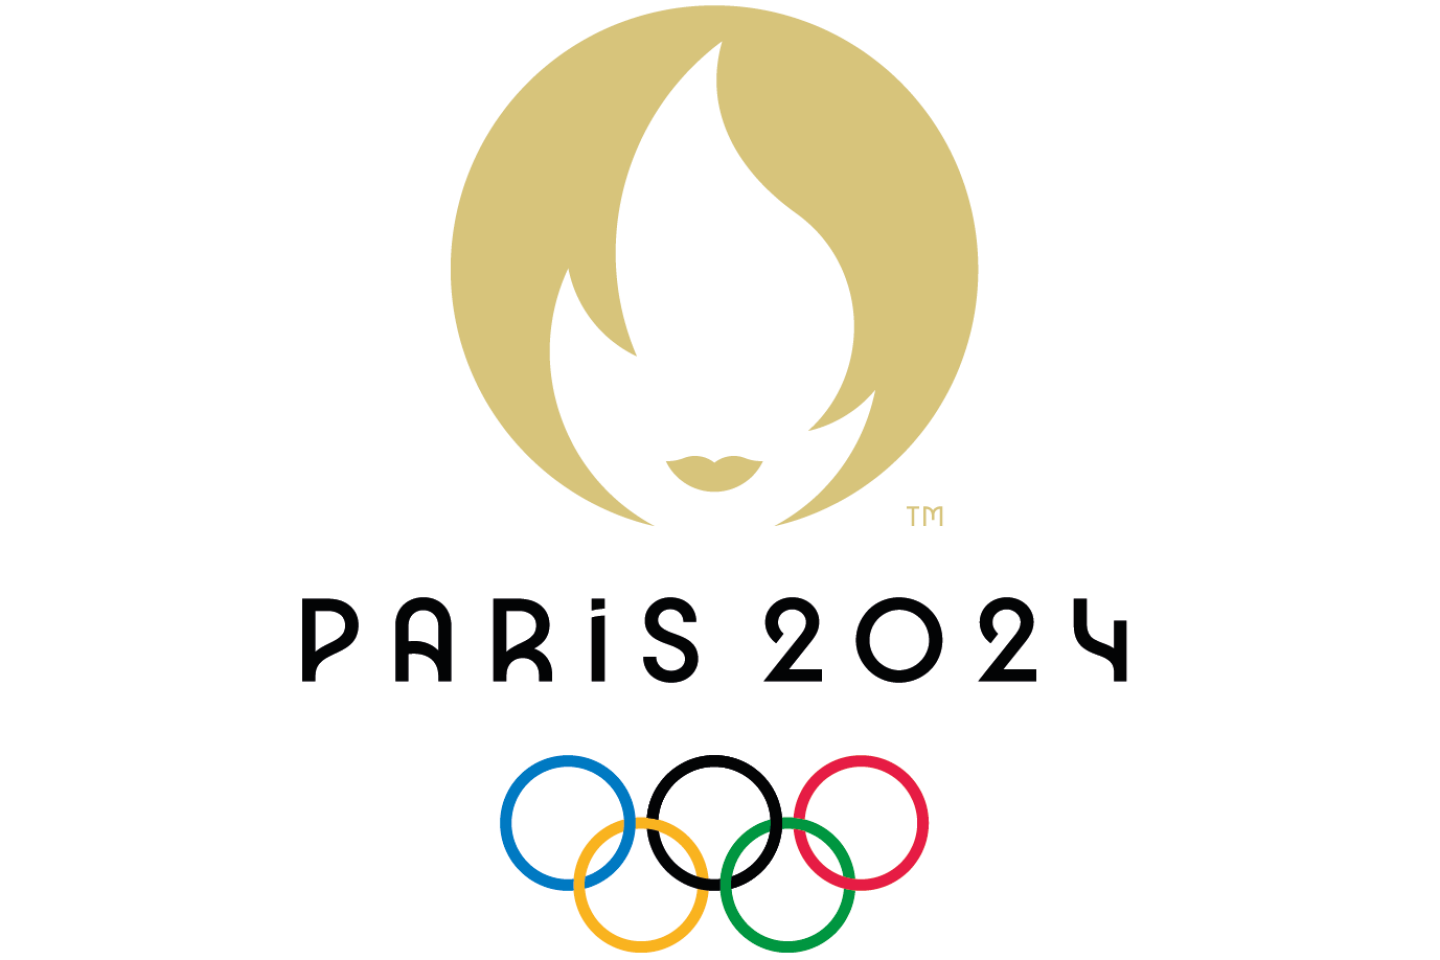 Rental refrigeration equipment for caterers - Paris 2024 Olympic Games